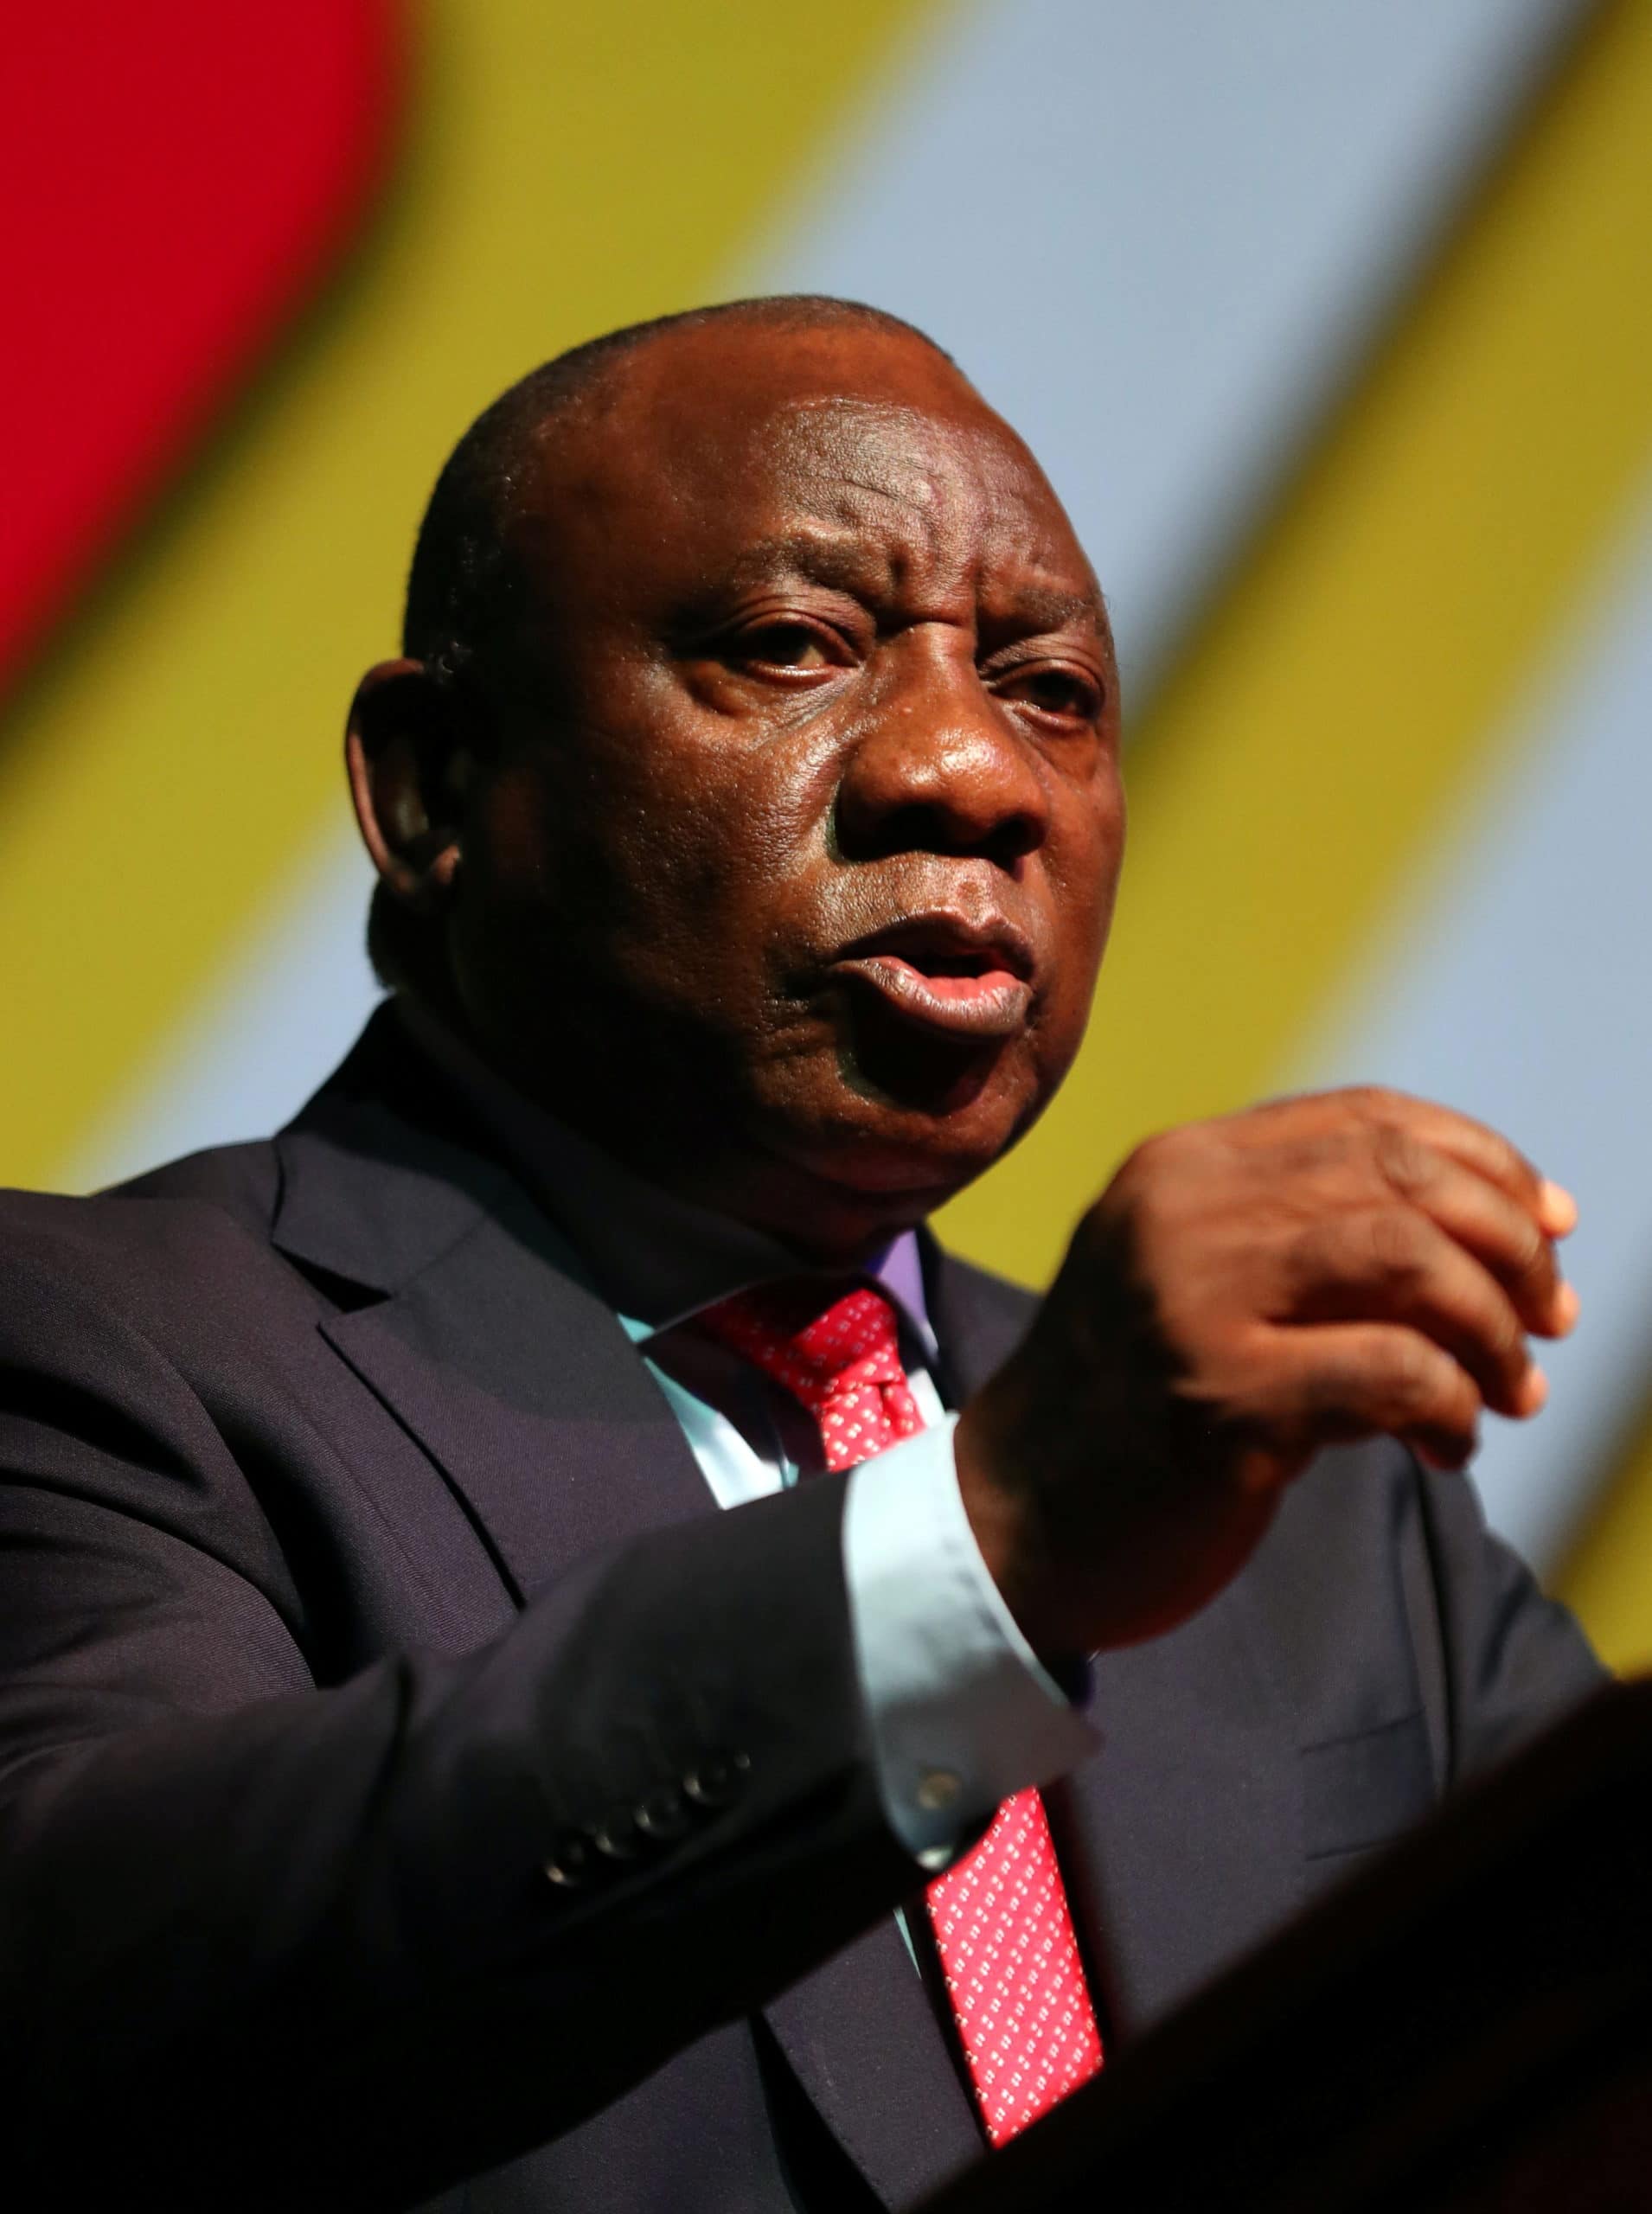 South African President Cyril Ramaphosa gestures as he delivers the opening address during the 3rd South Africa Investment Conference in Sandton